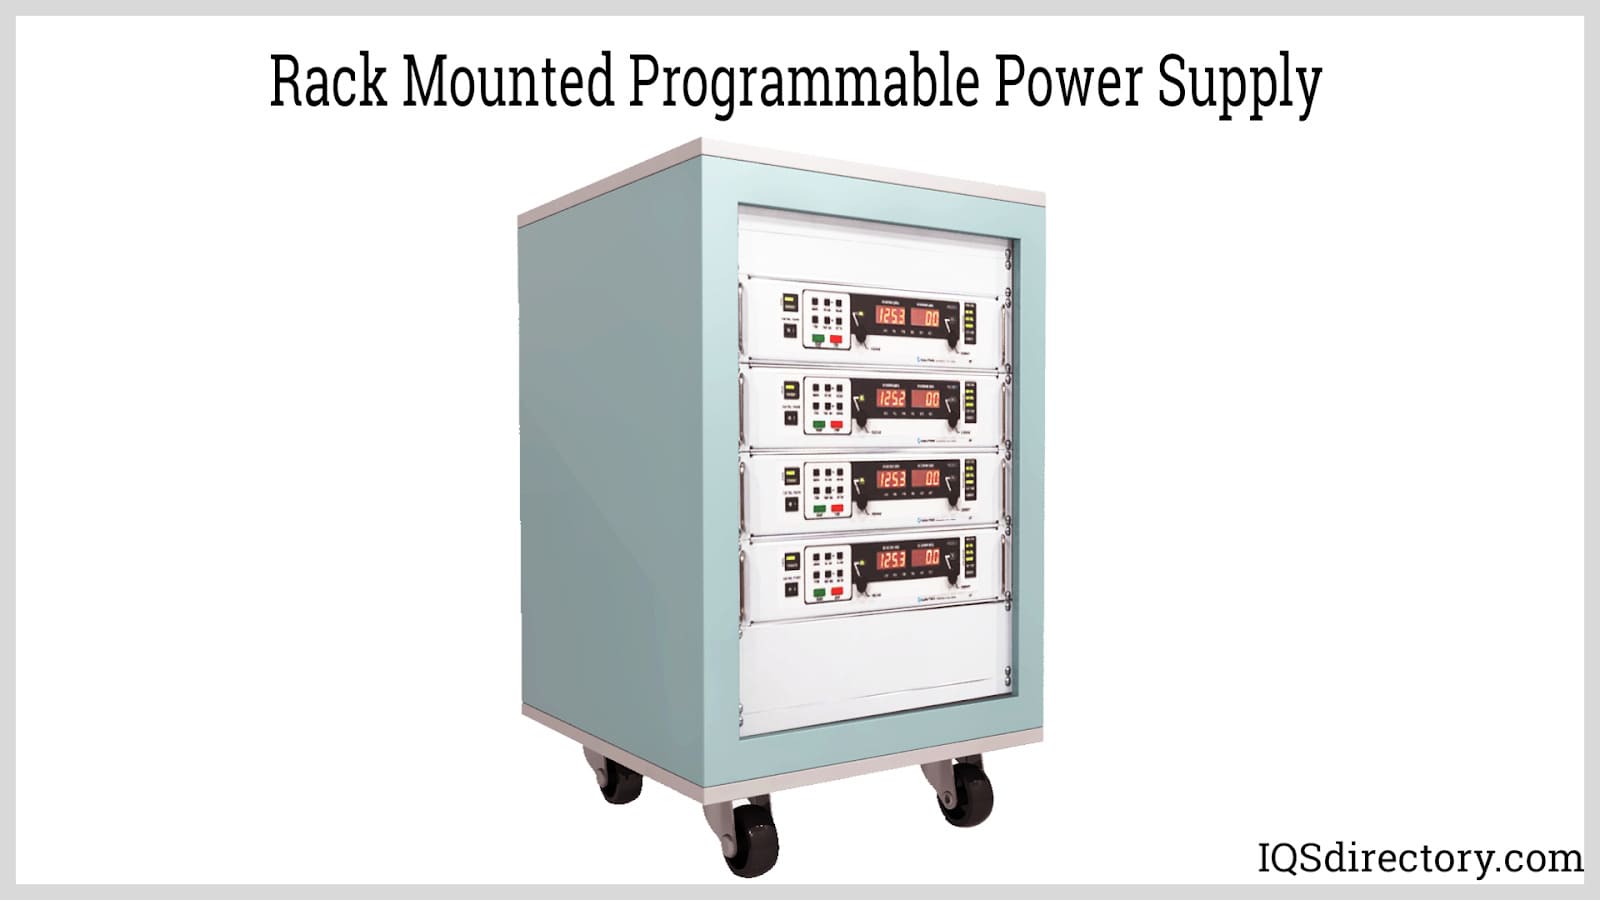 Rack Mounted Programmable Power Supply